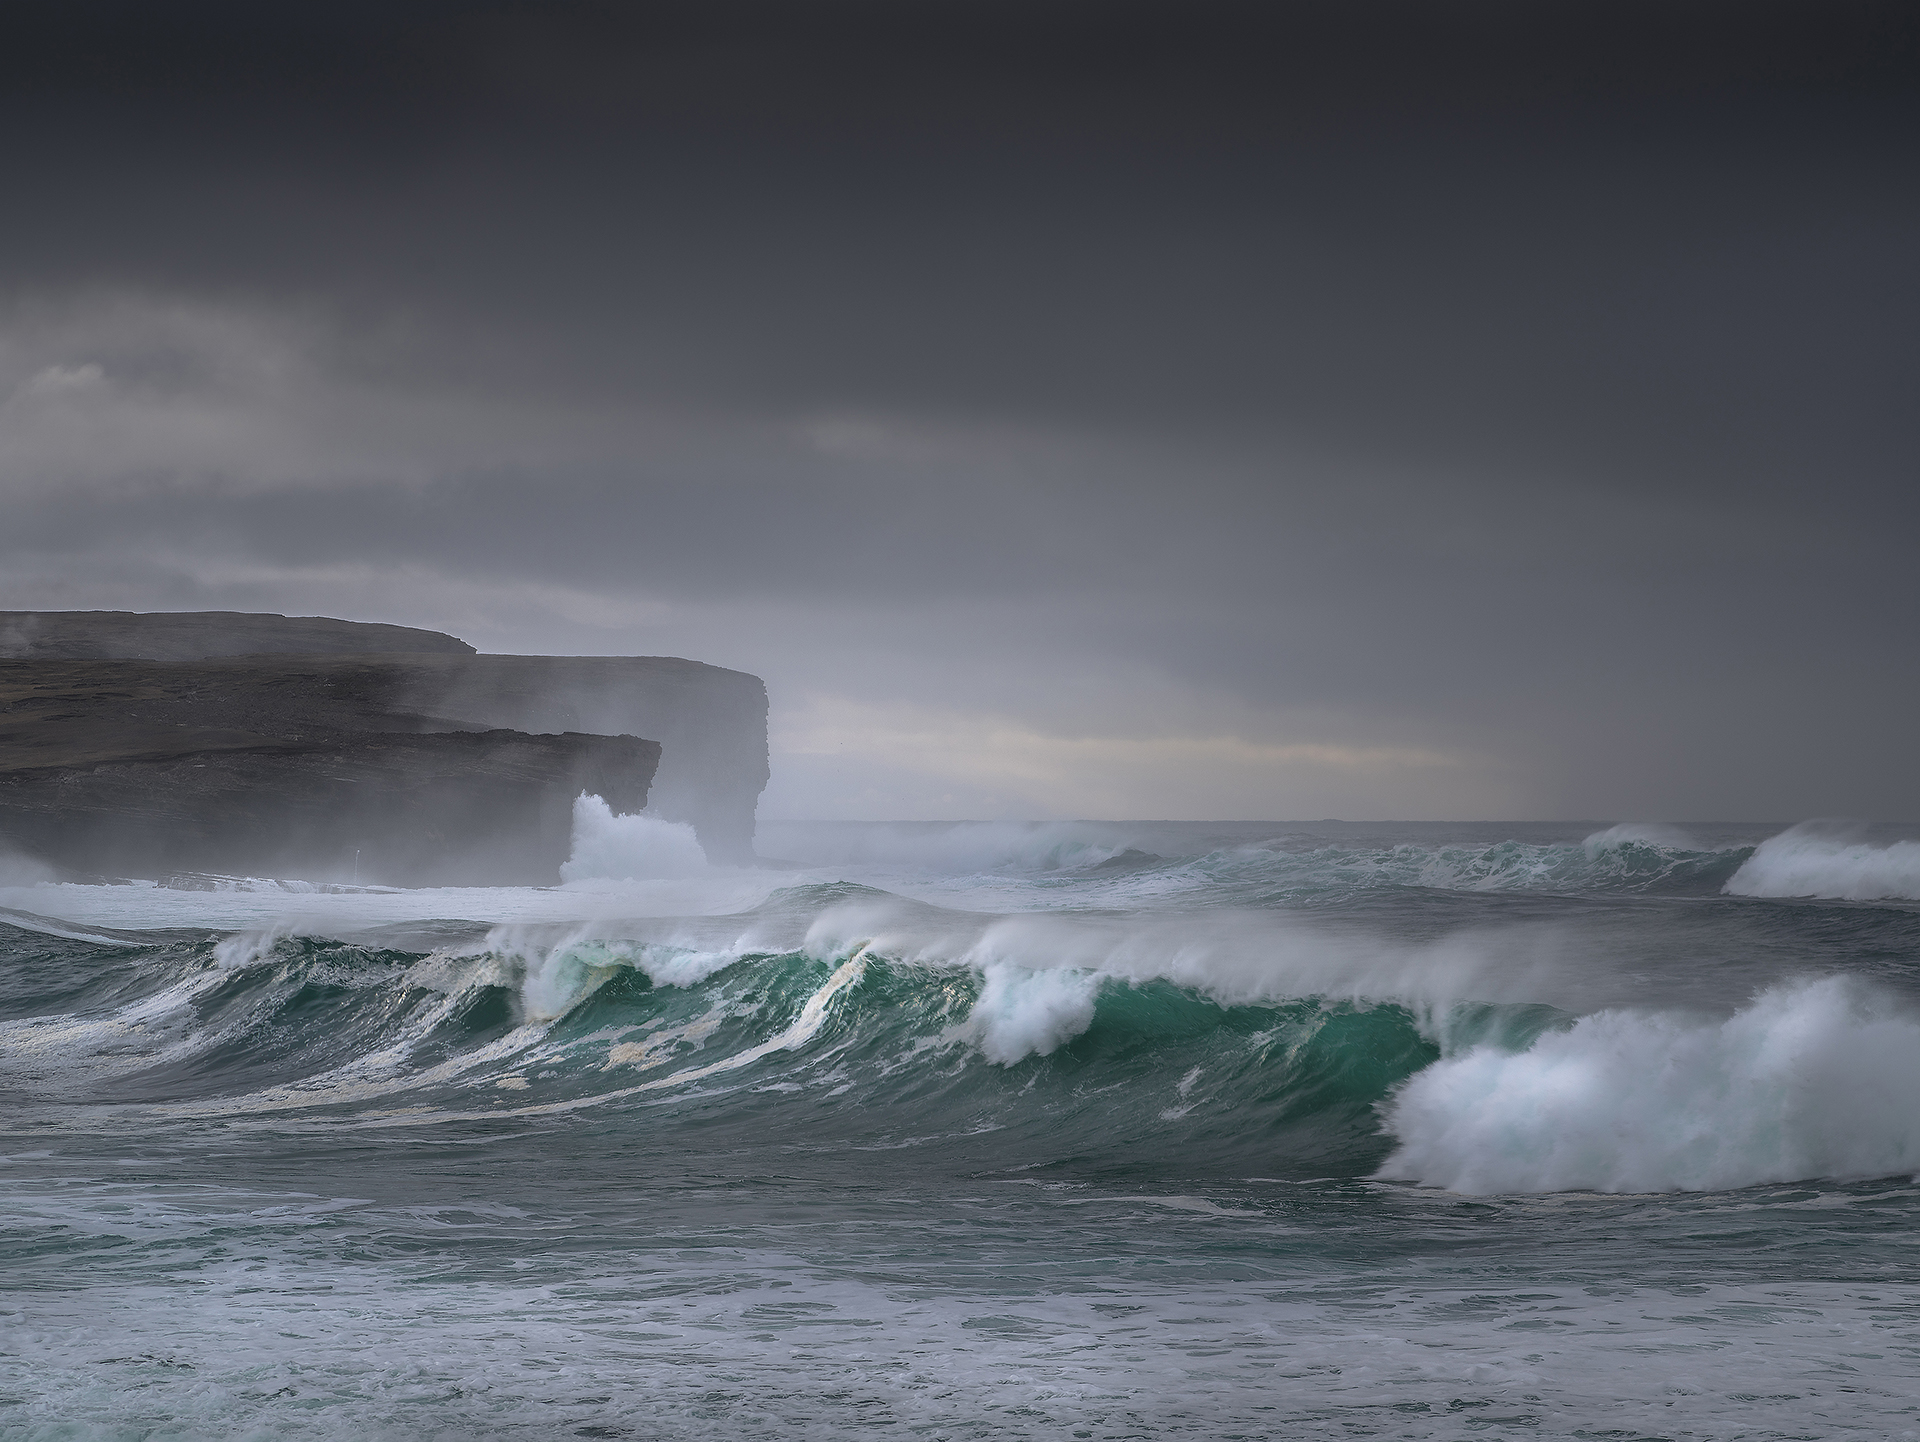 Bay of Skaill, Orkney